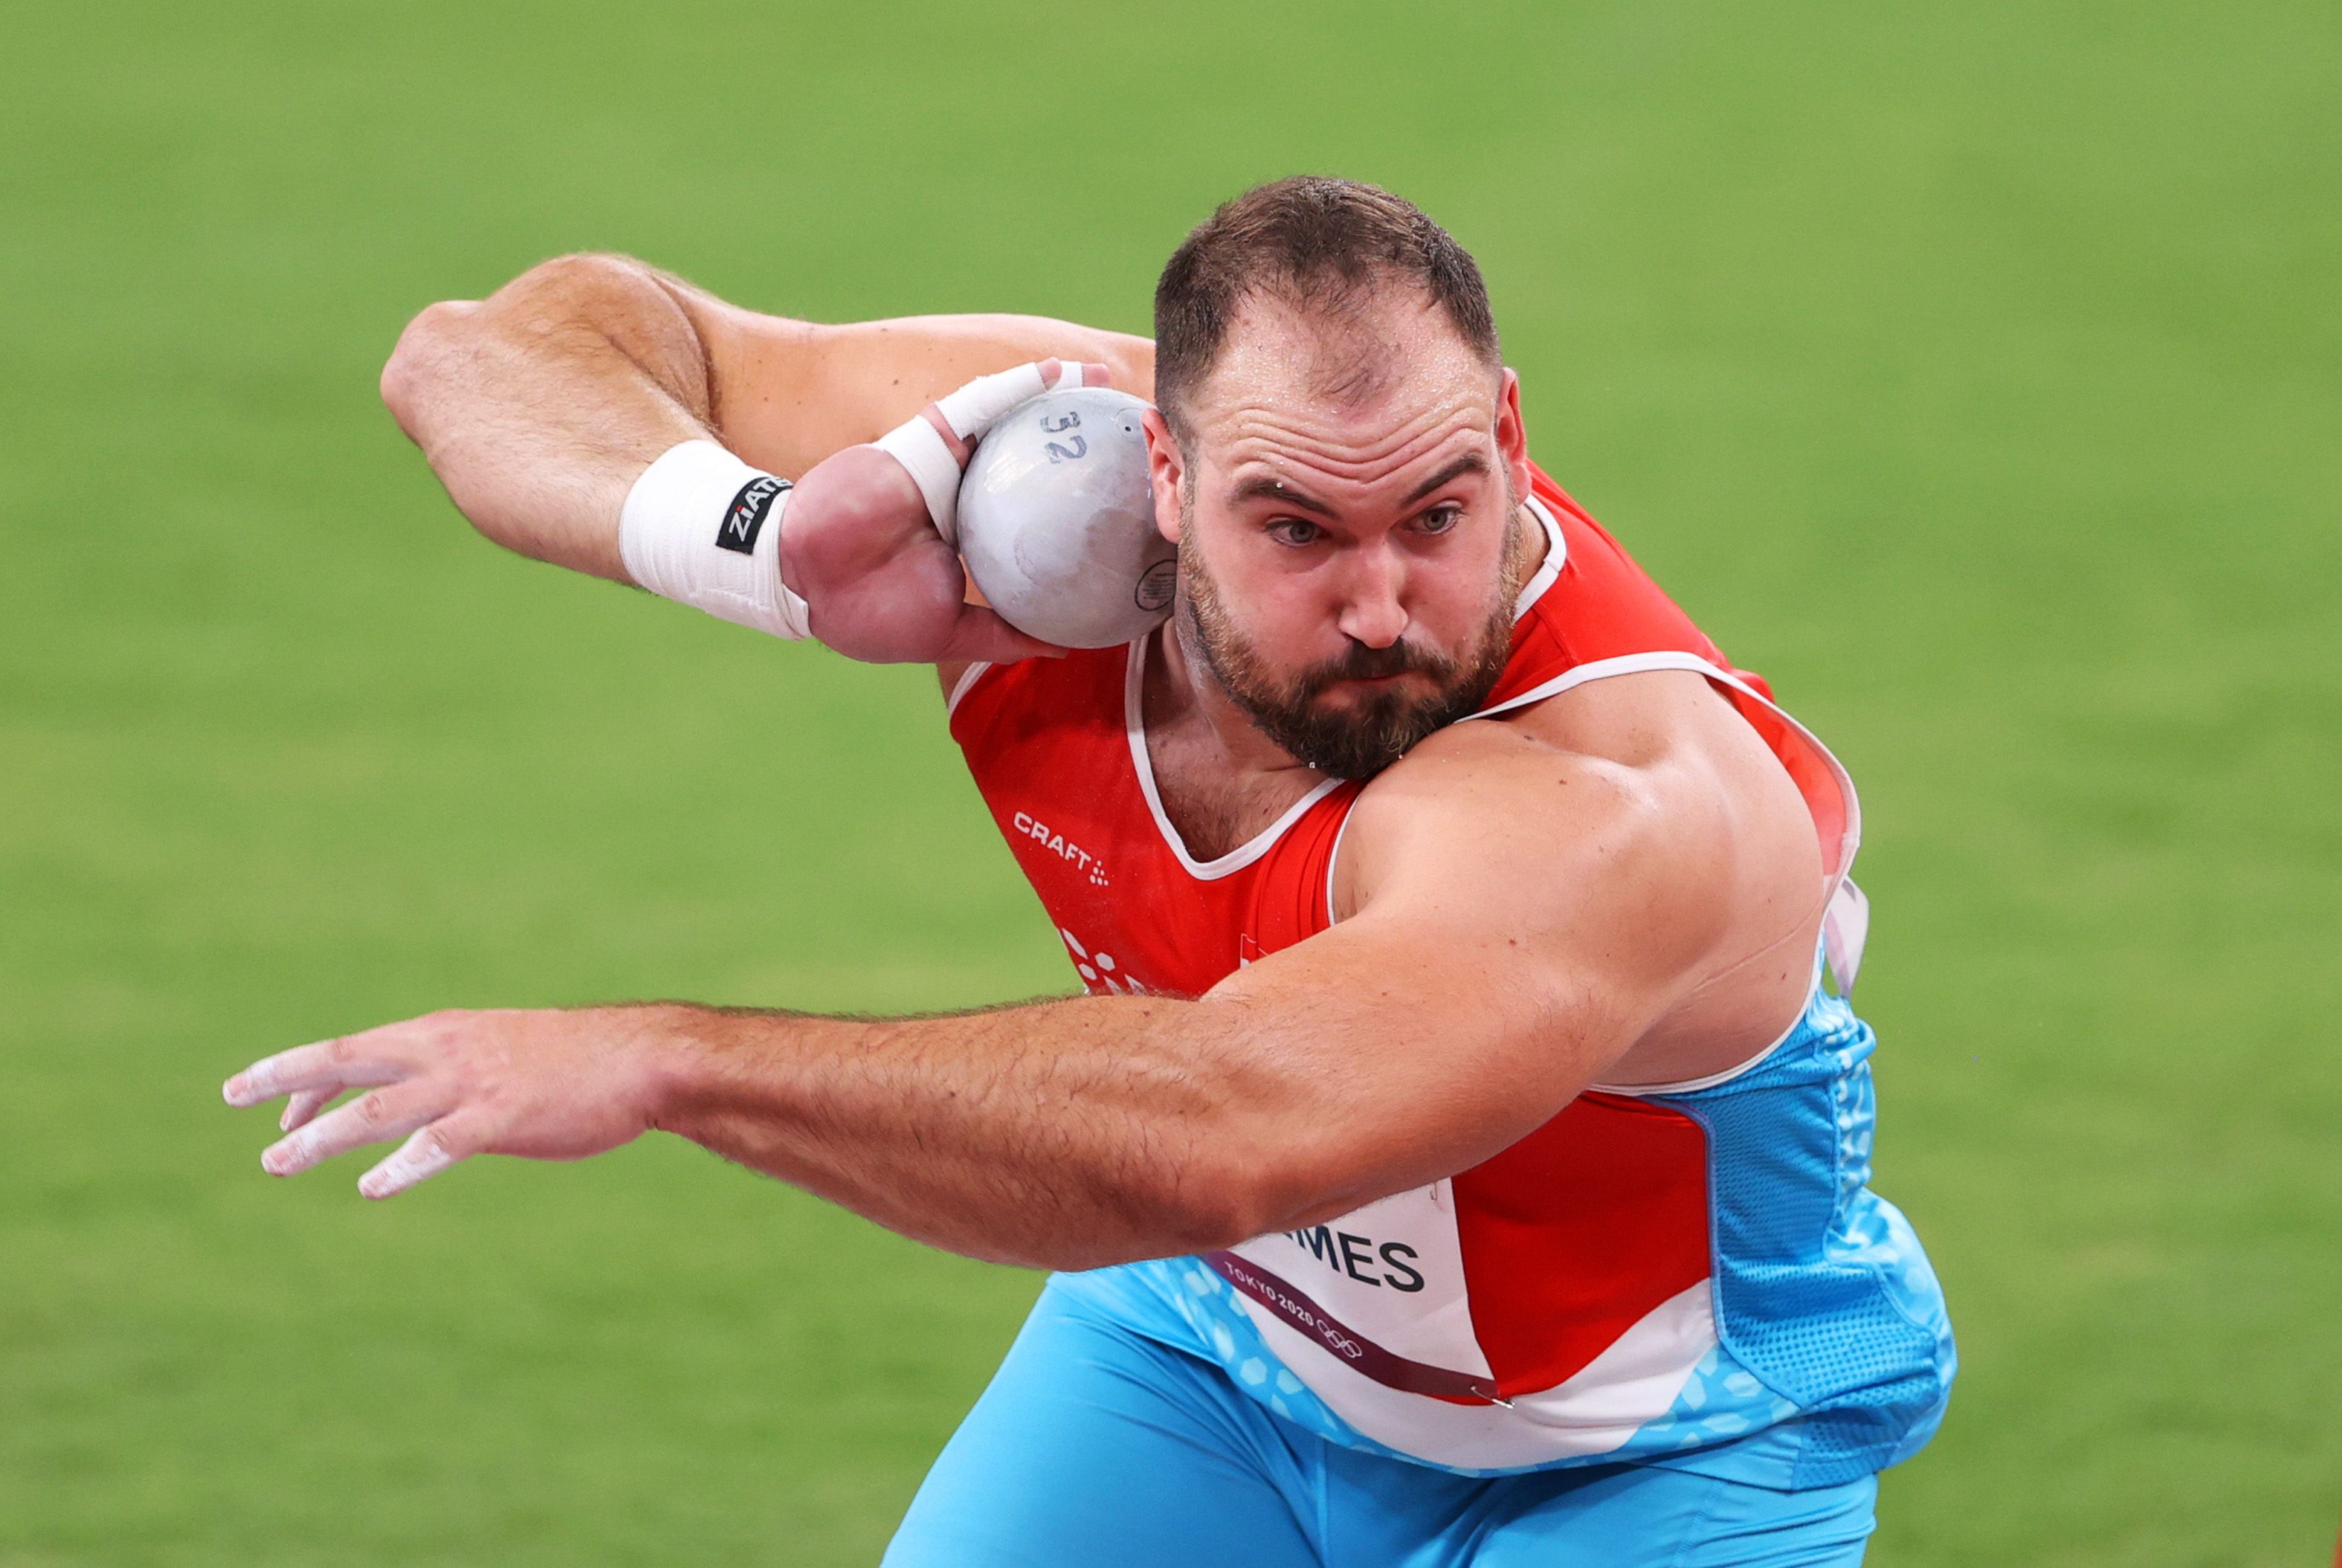 Luxembourg's Bob Bertemes at the Olympic Games in Tokyo